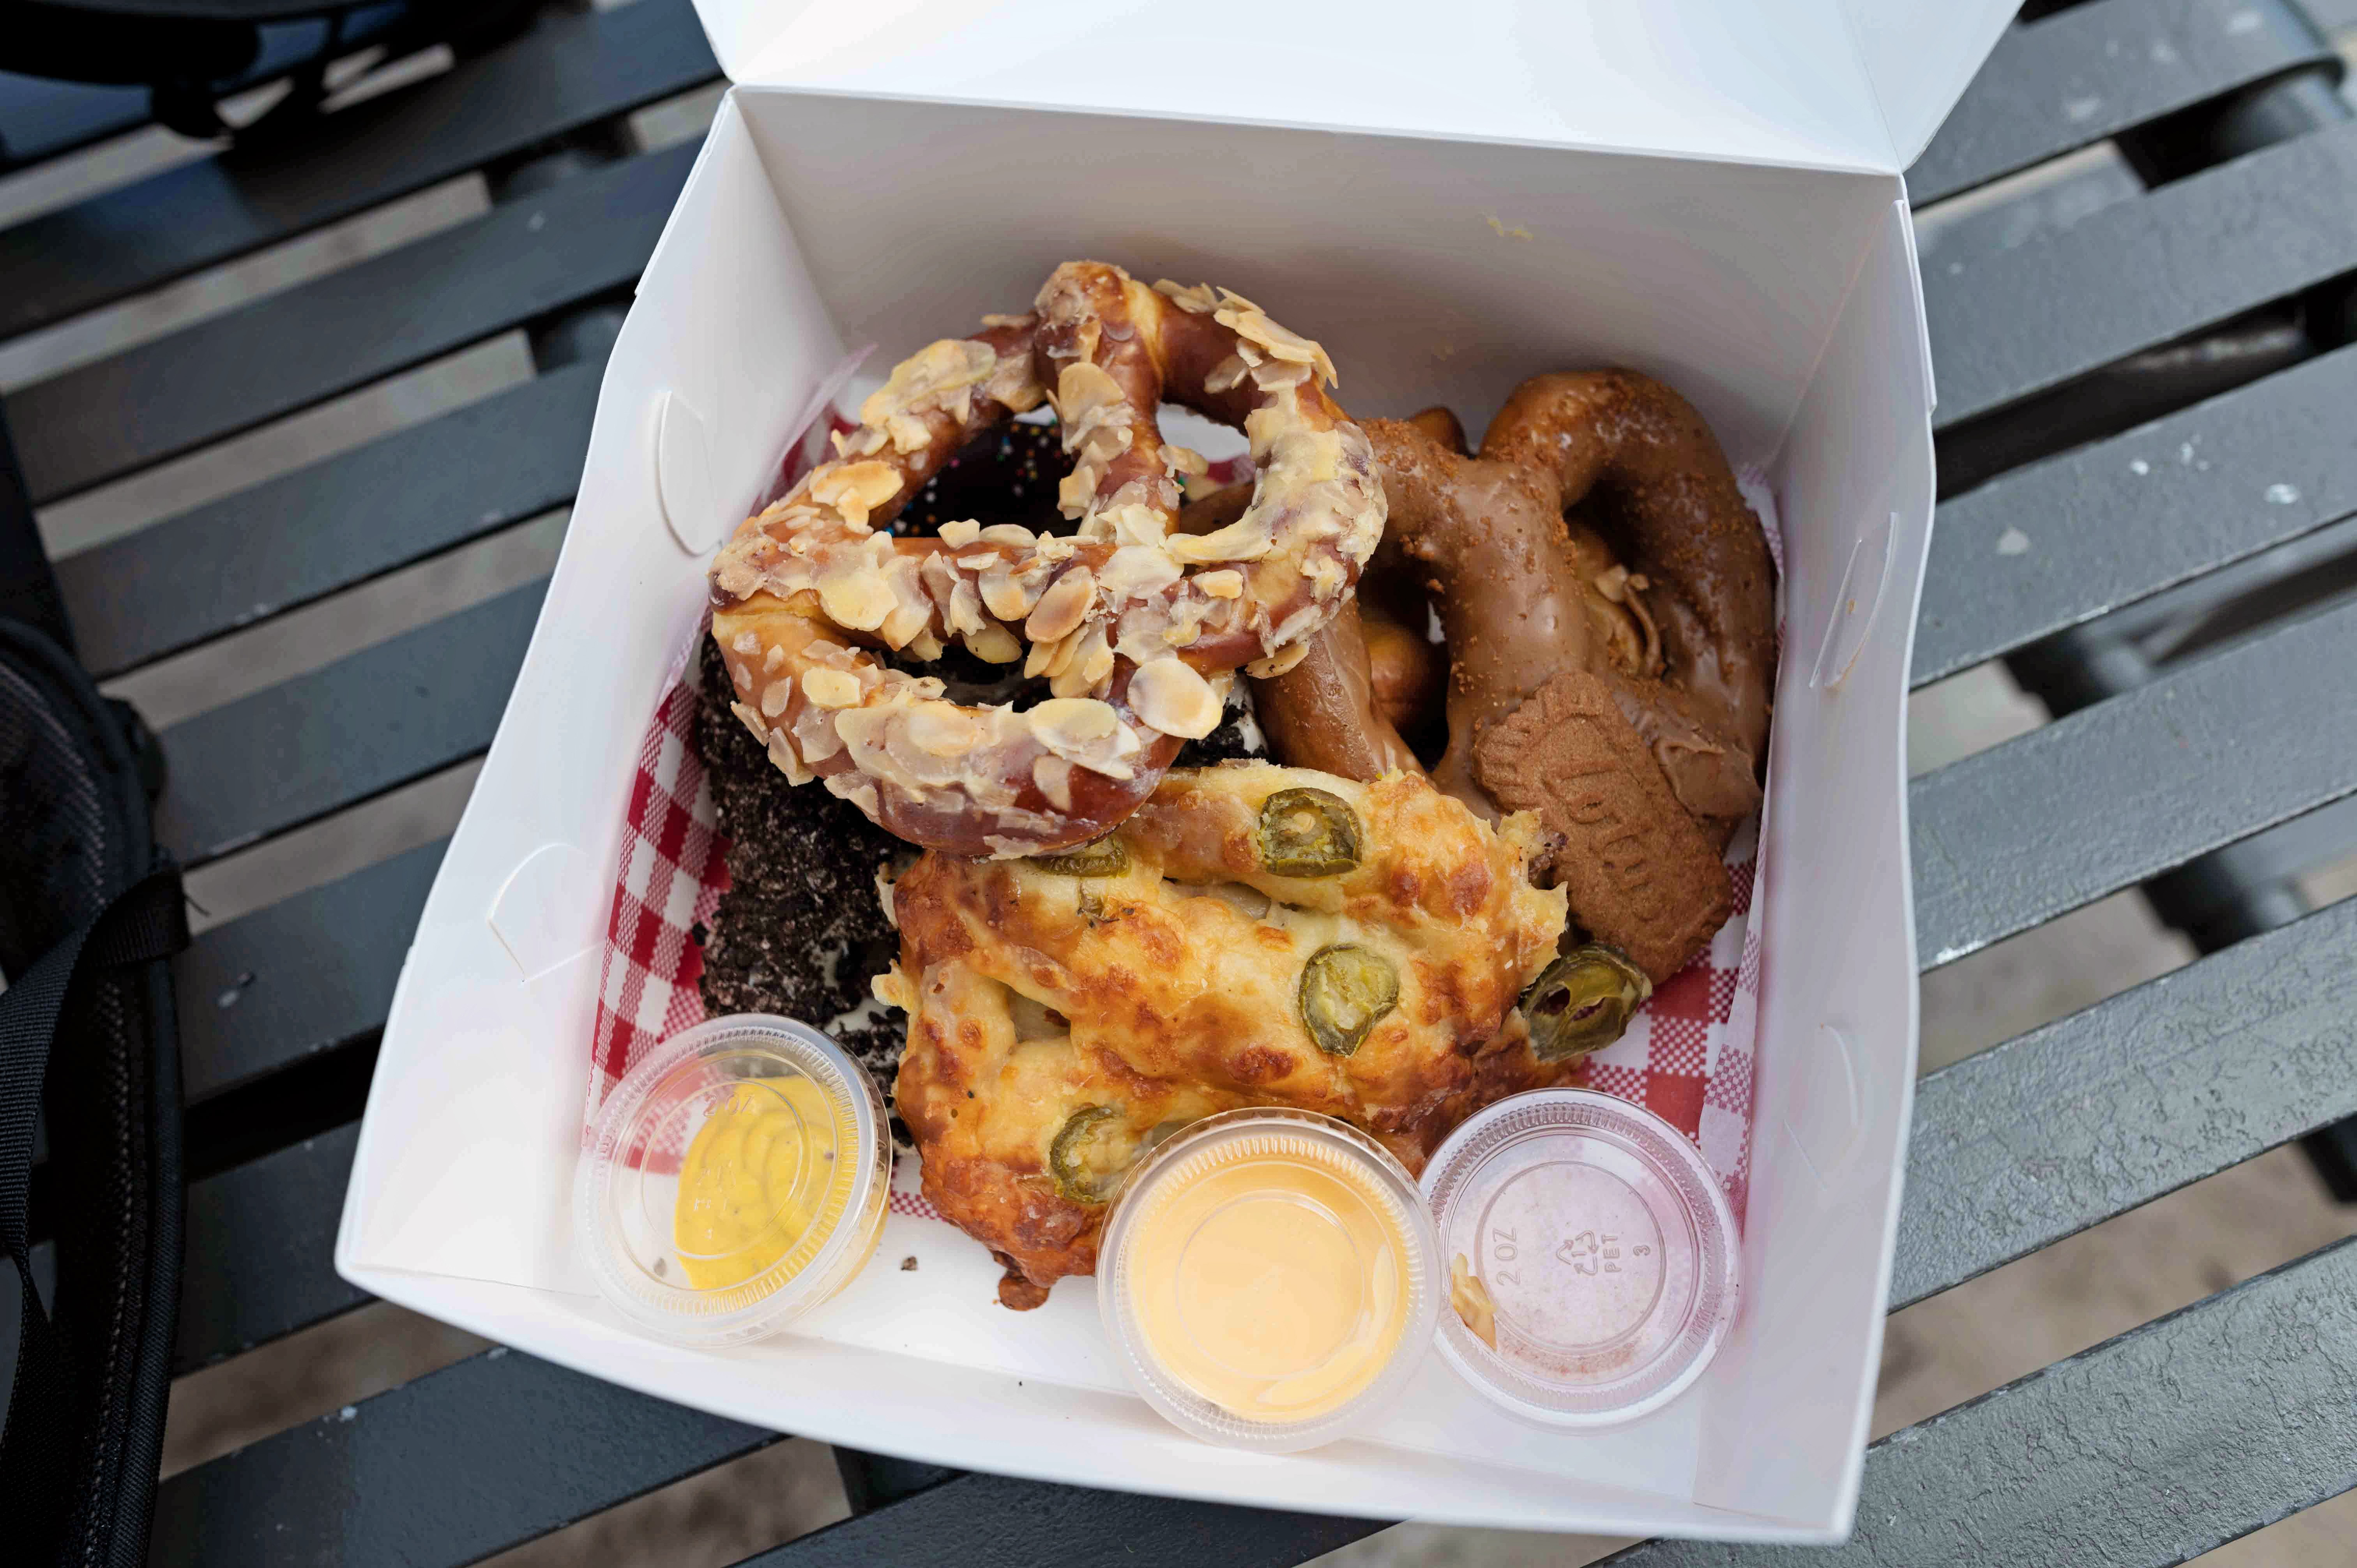 Hot in the City: You knead a box of The Bite CBR’s pretzels in your life!